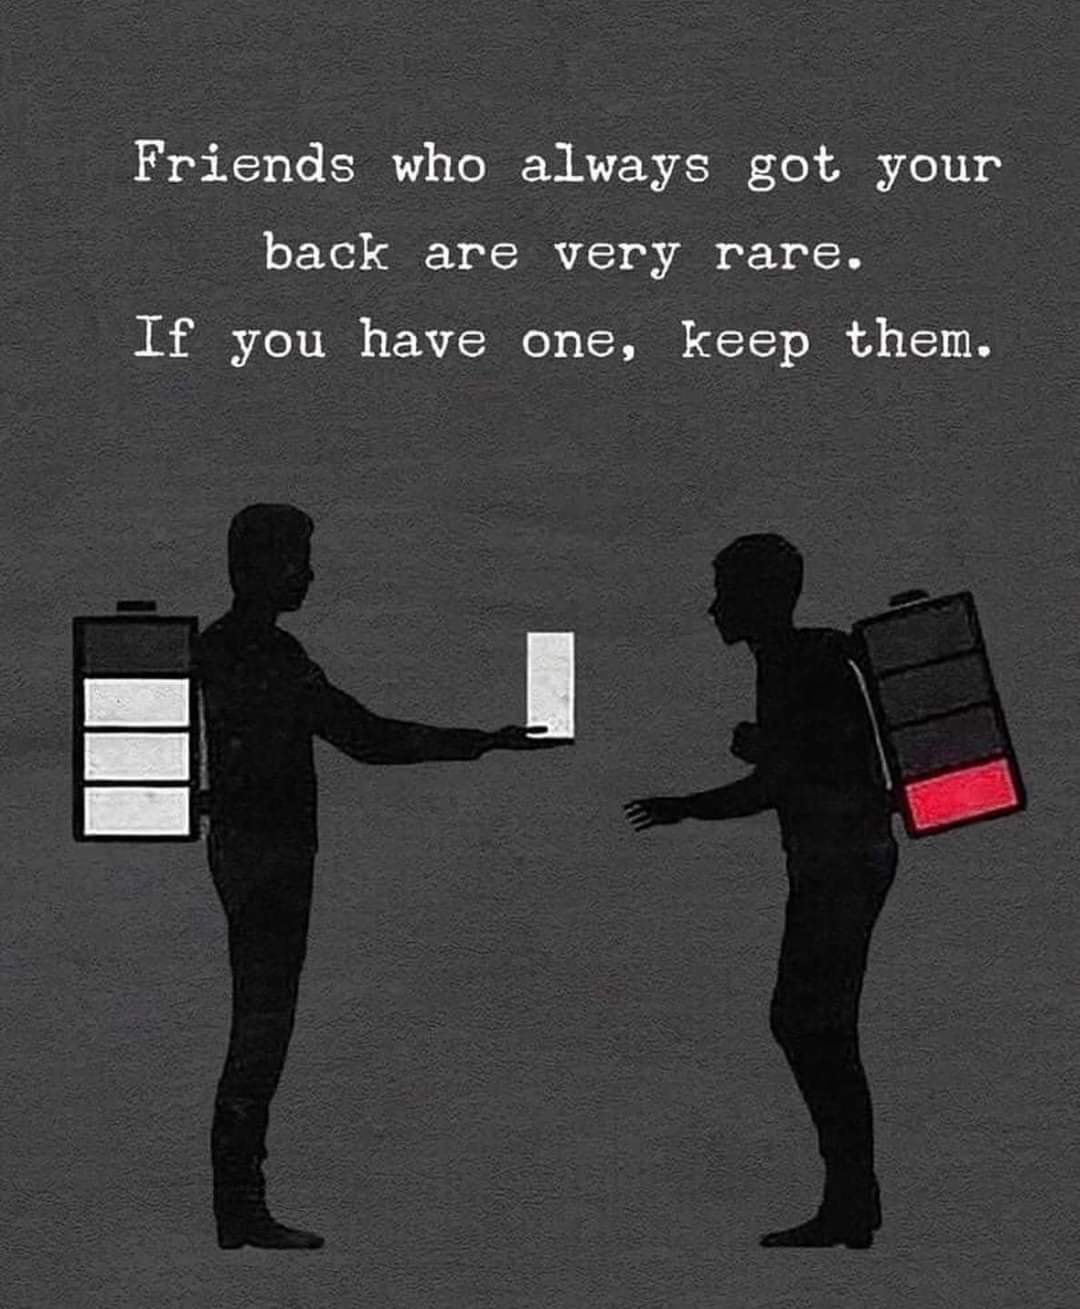 Friends who always got your back are very rare. If you have one, keep them.